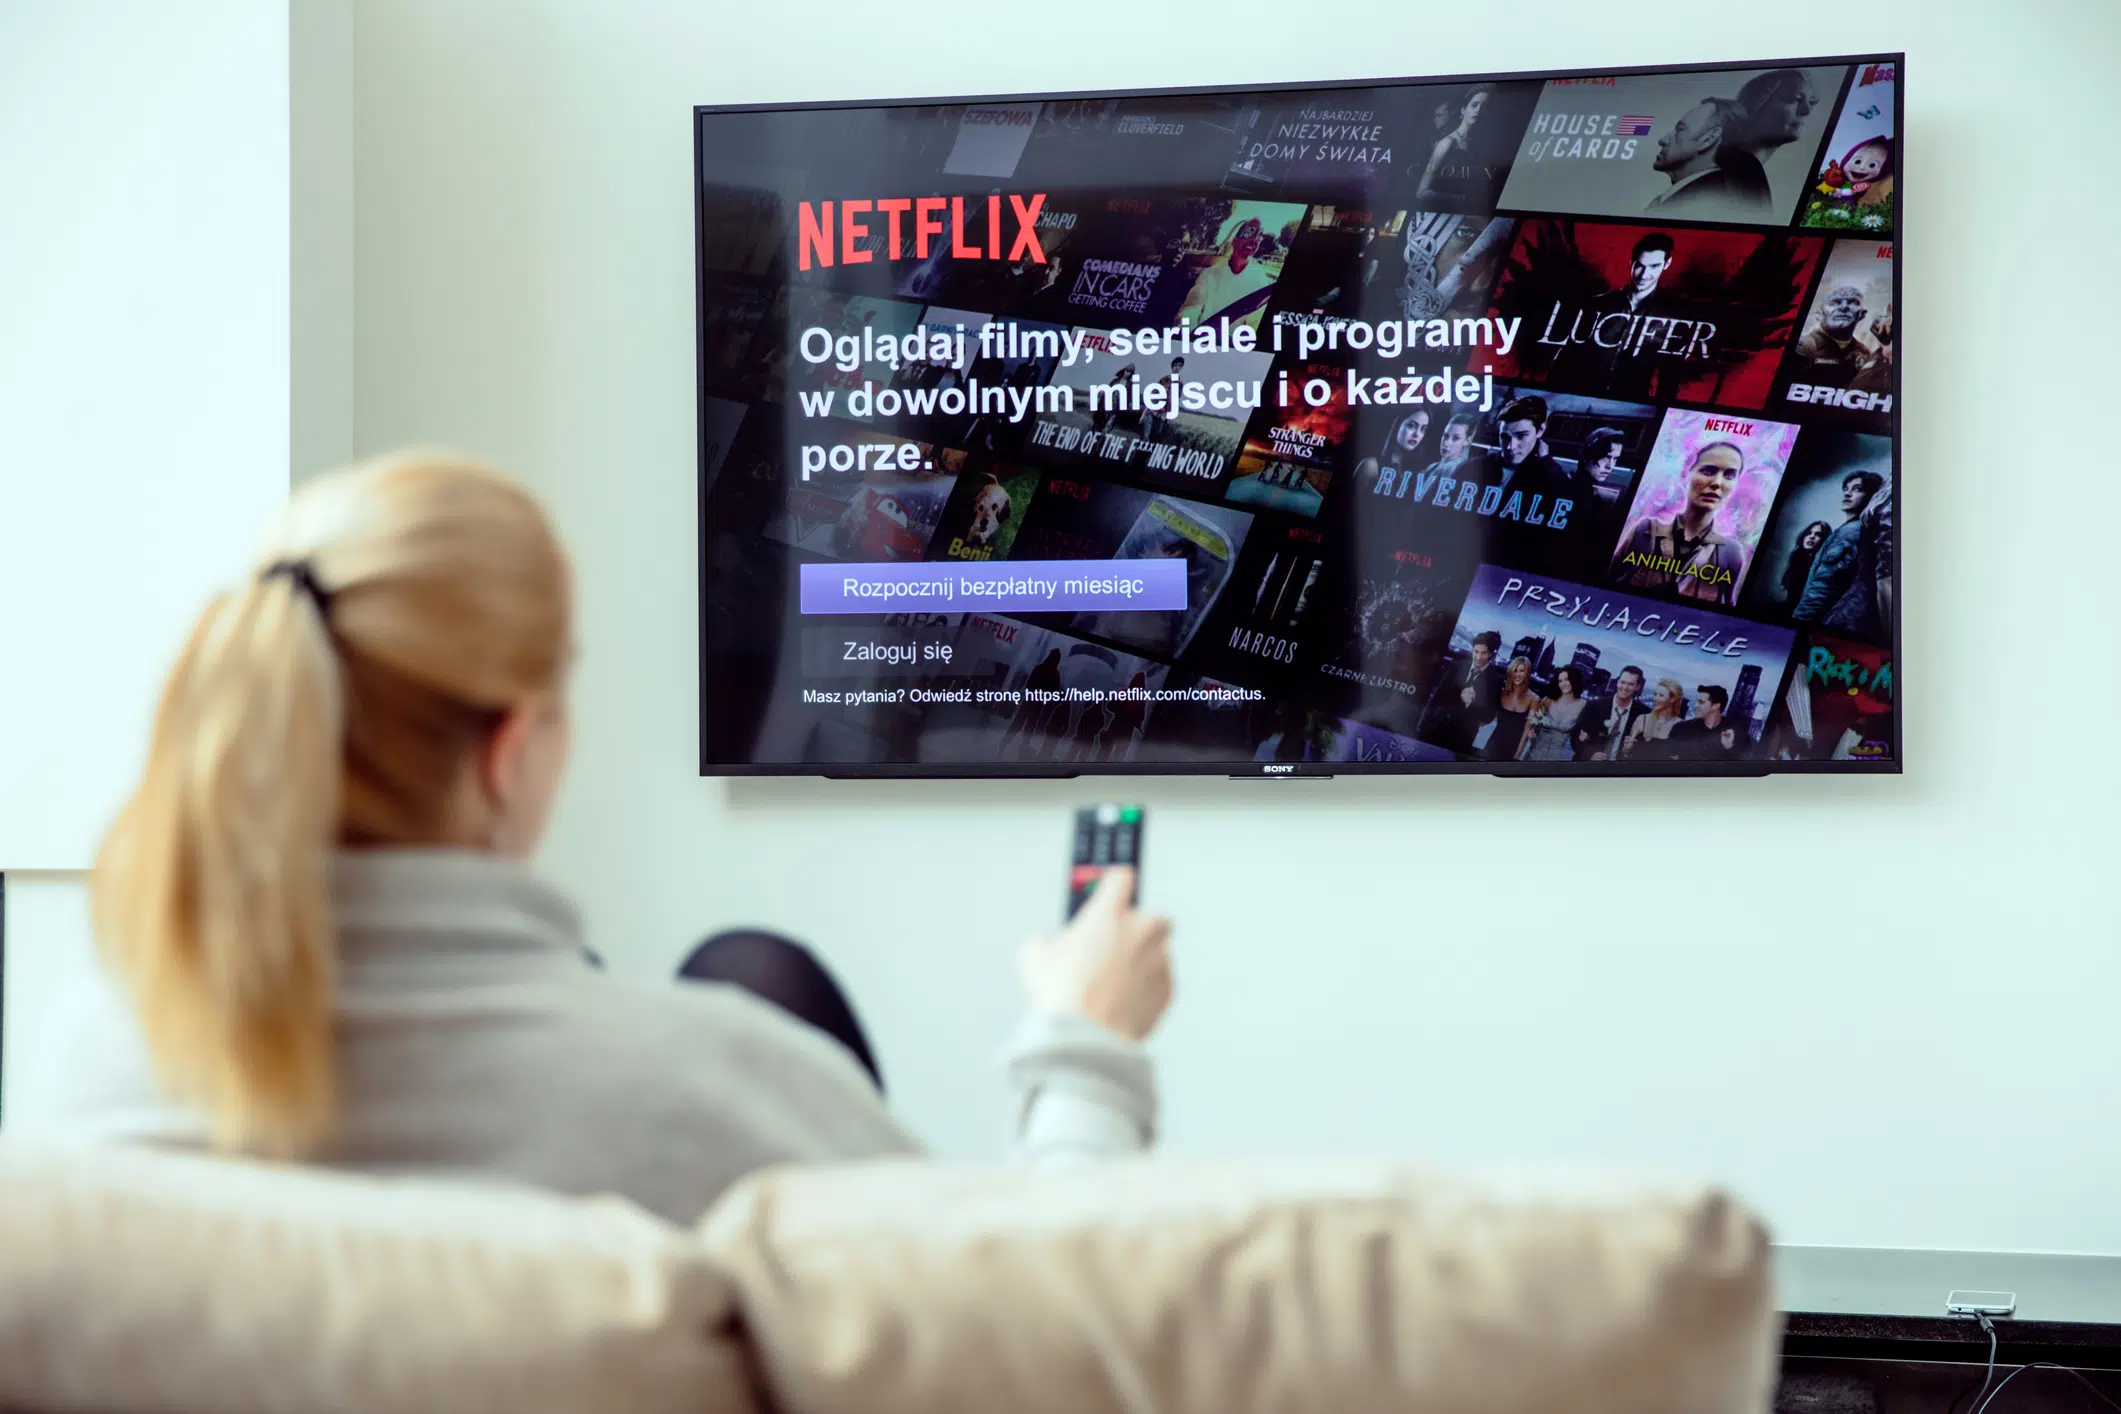 Netflix testing new feature to stop password sharing